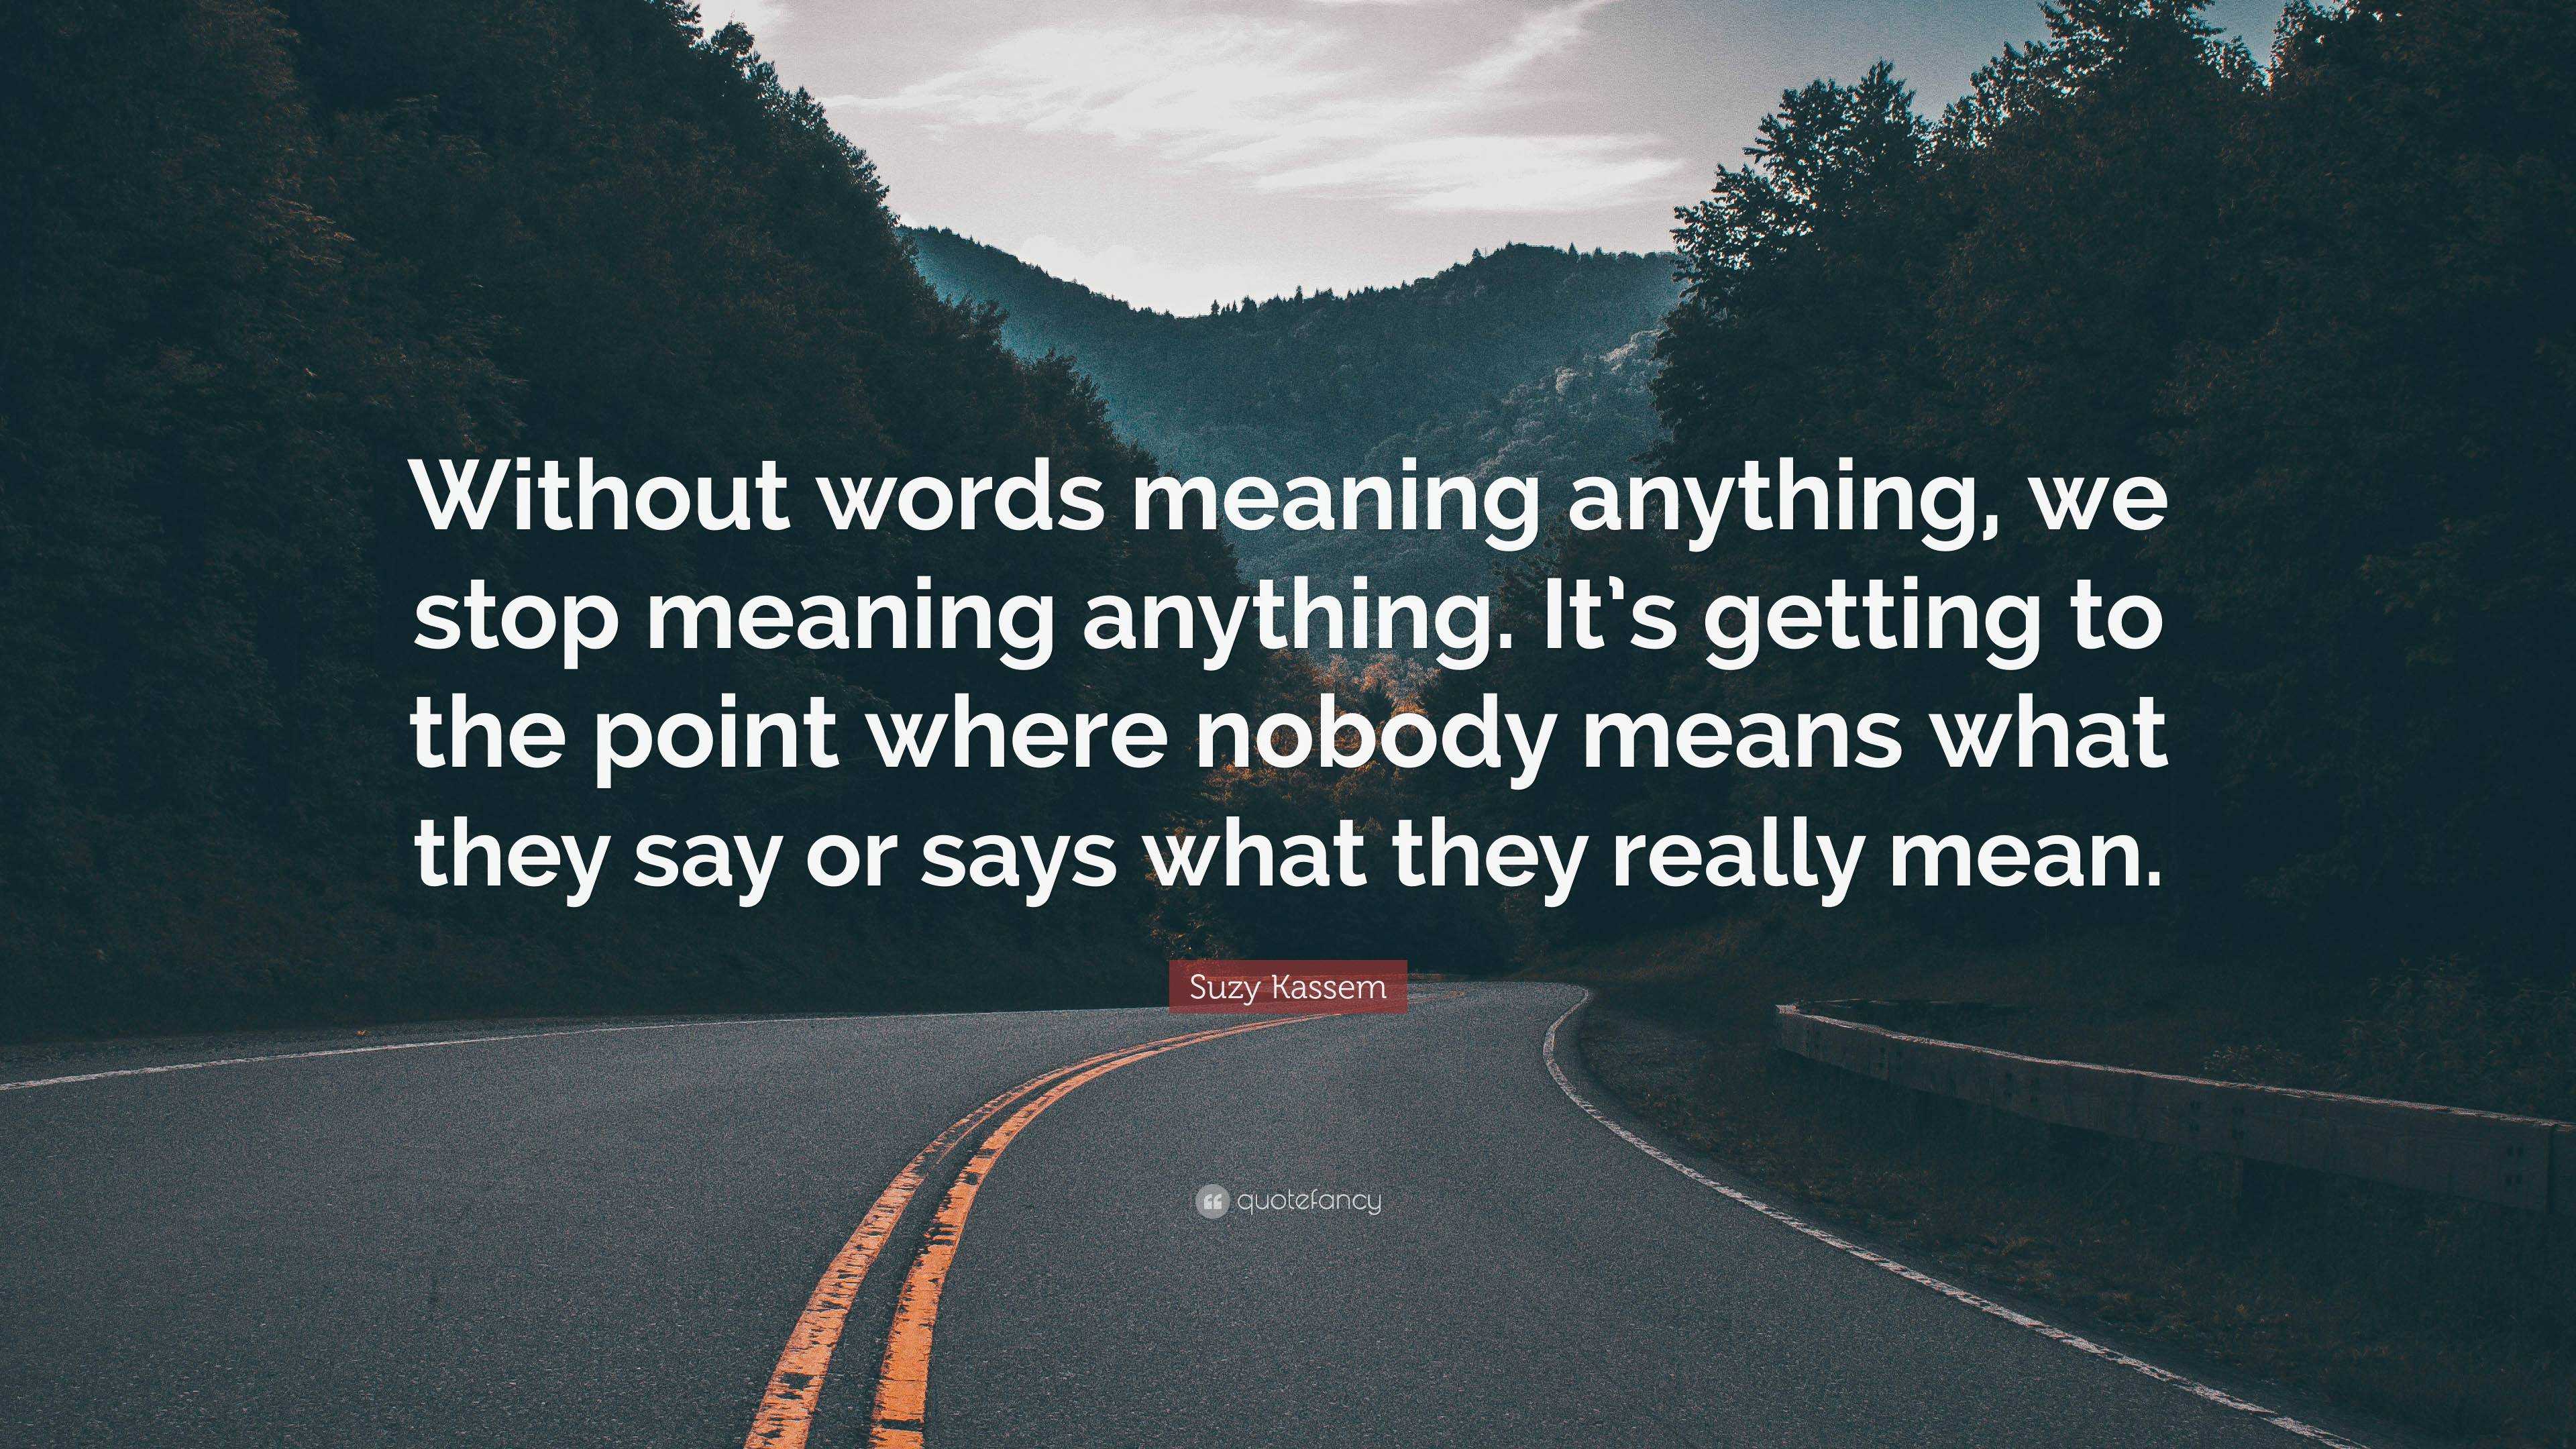 https://quotefancy.com/media/wallpaper/3840x2160/6881220-Suzy-Kassem-Quote-Without-words-meaning-anything-we-stop-meaning.jpg